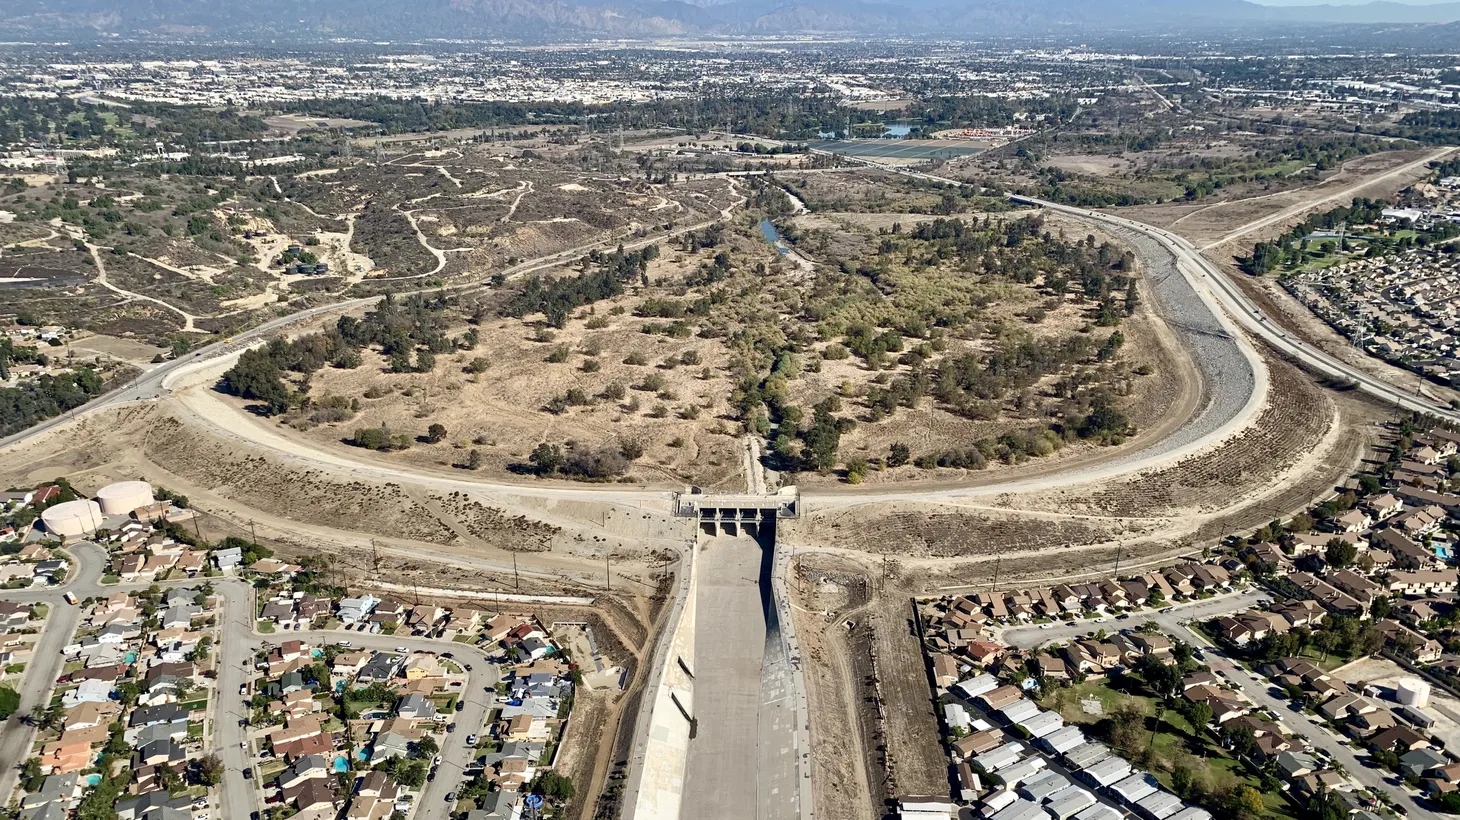 The U.S. Army Corps of Engineers operates the three-mile long Whittier Narrows Dam.